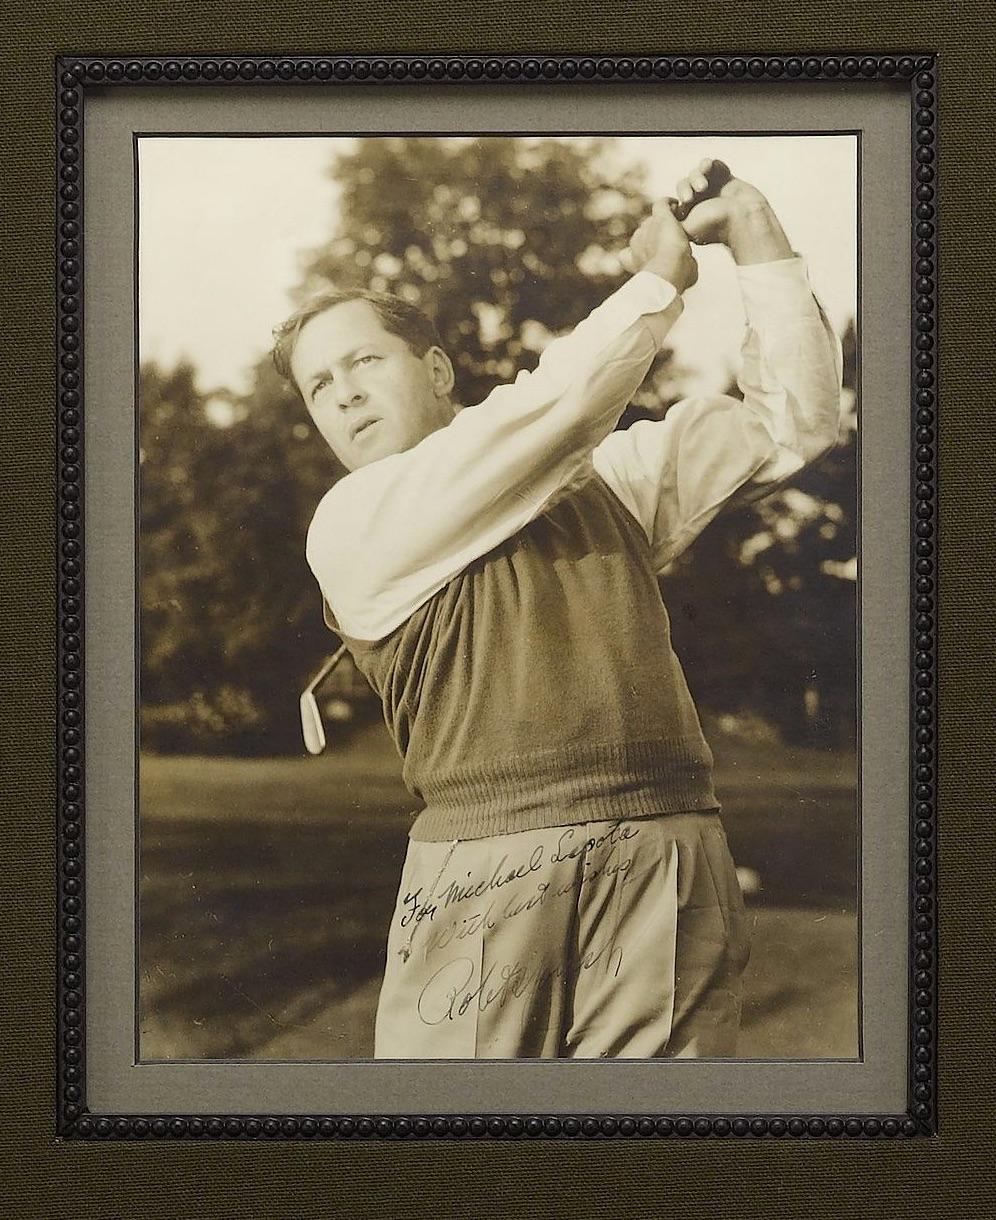 The most celebrated golfers of the 20th century are captured together in this magnificent one-of-a-kind golf collectible. Presented are the authentic signatures of Bobby Jones, Walter Hagen, Ben Hogan, Arnold Palmer, Jack Nicklaus, Gary Player, Gene